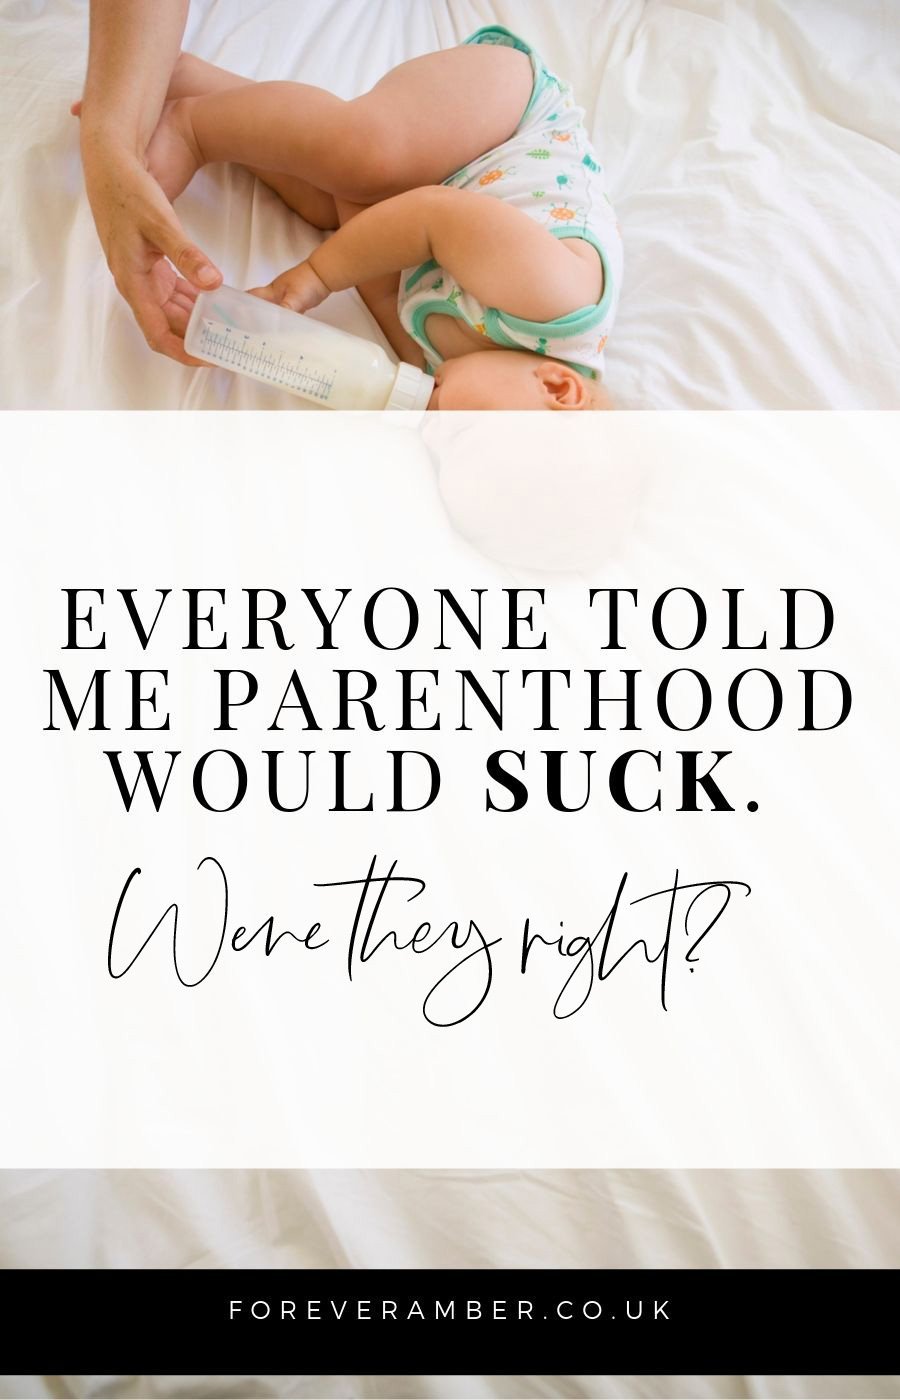 Everyone told me parenthood would suck: but were they right?